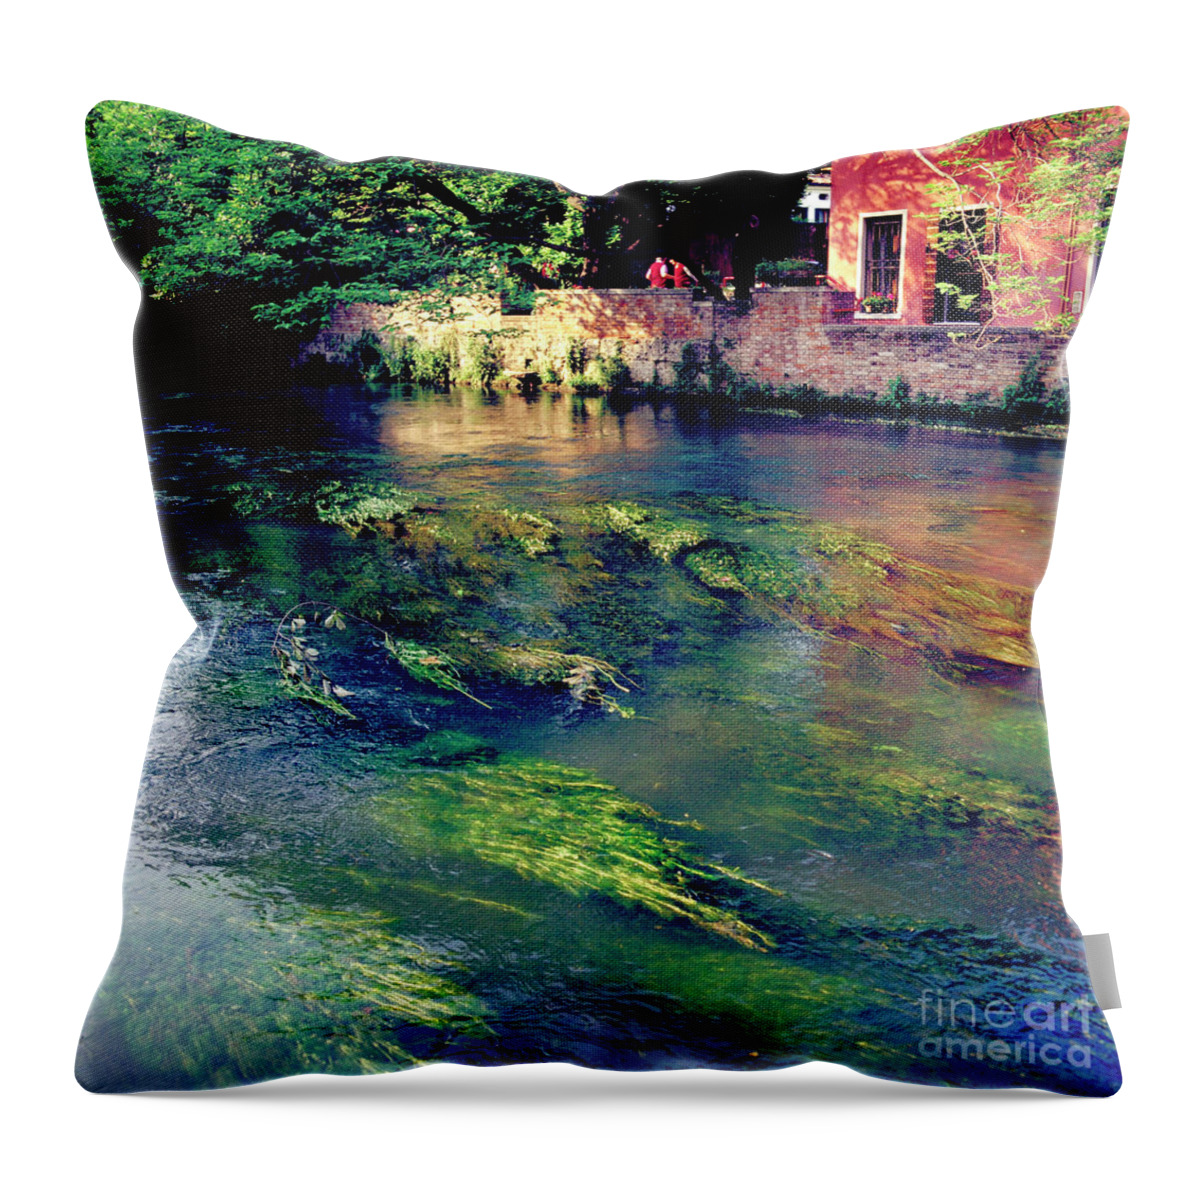 Heiko Throw Pillow featuring the photograph River Sile in Treviso Italy by Heiko Koehrer-Wagner